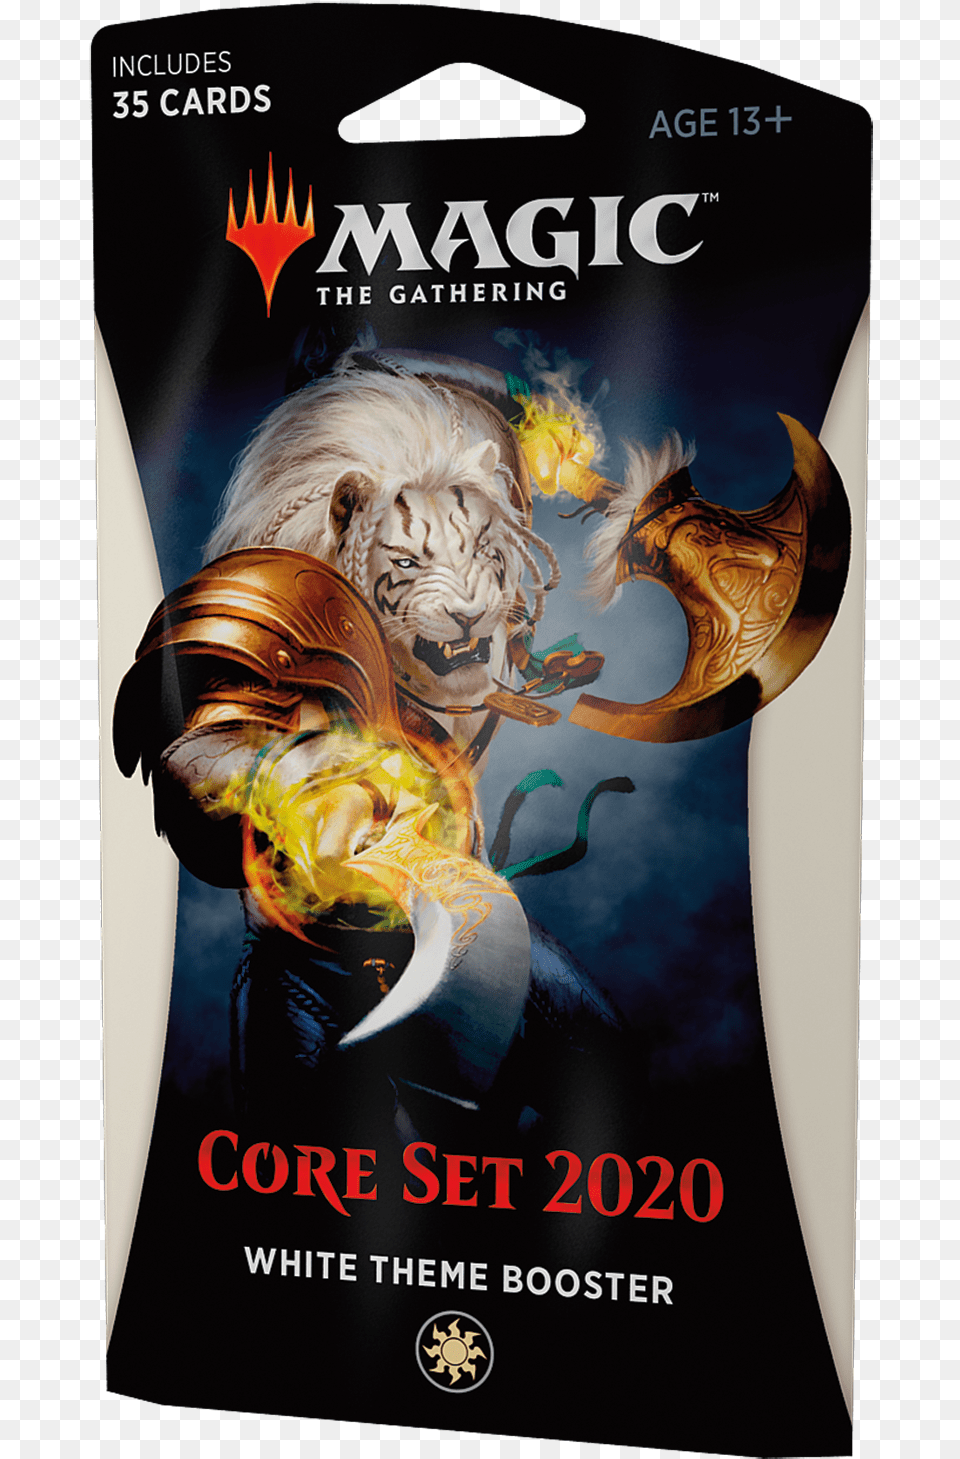 Core Set 2020 Theme Booster White, Book, Publication, Advertisement, Poster Free Transparent Png